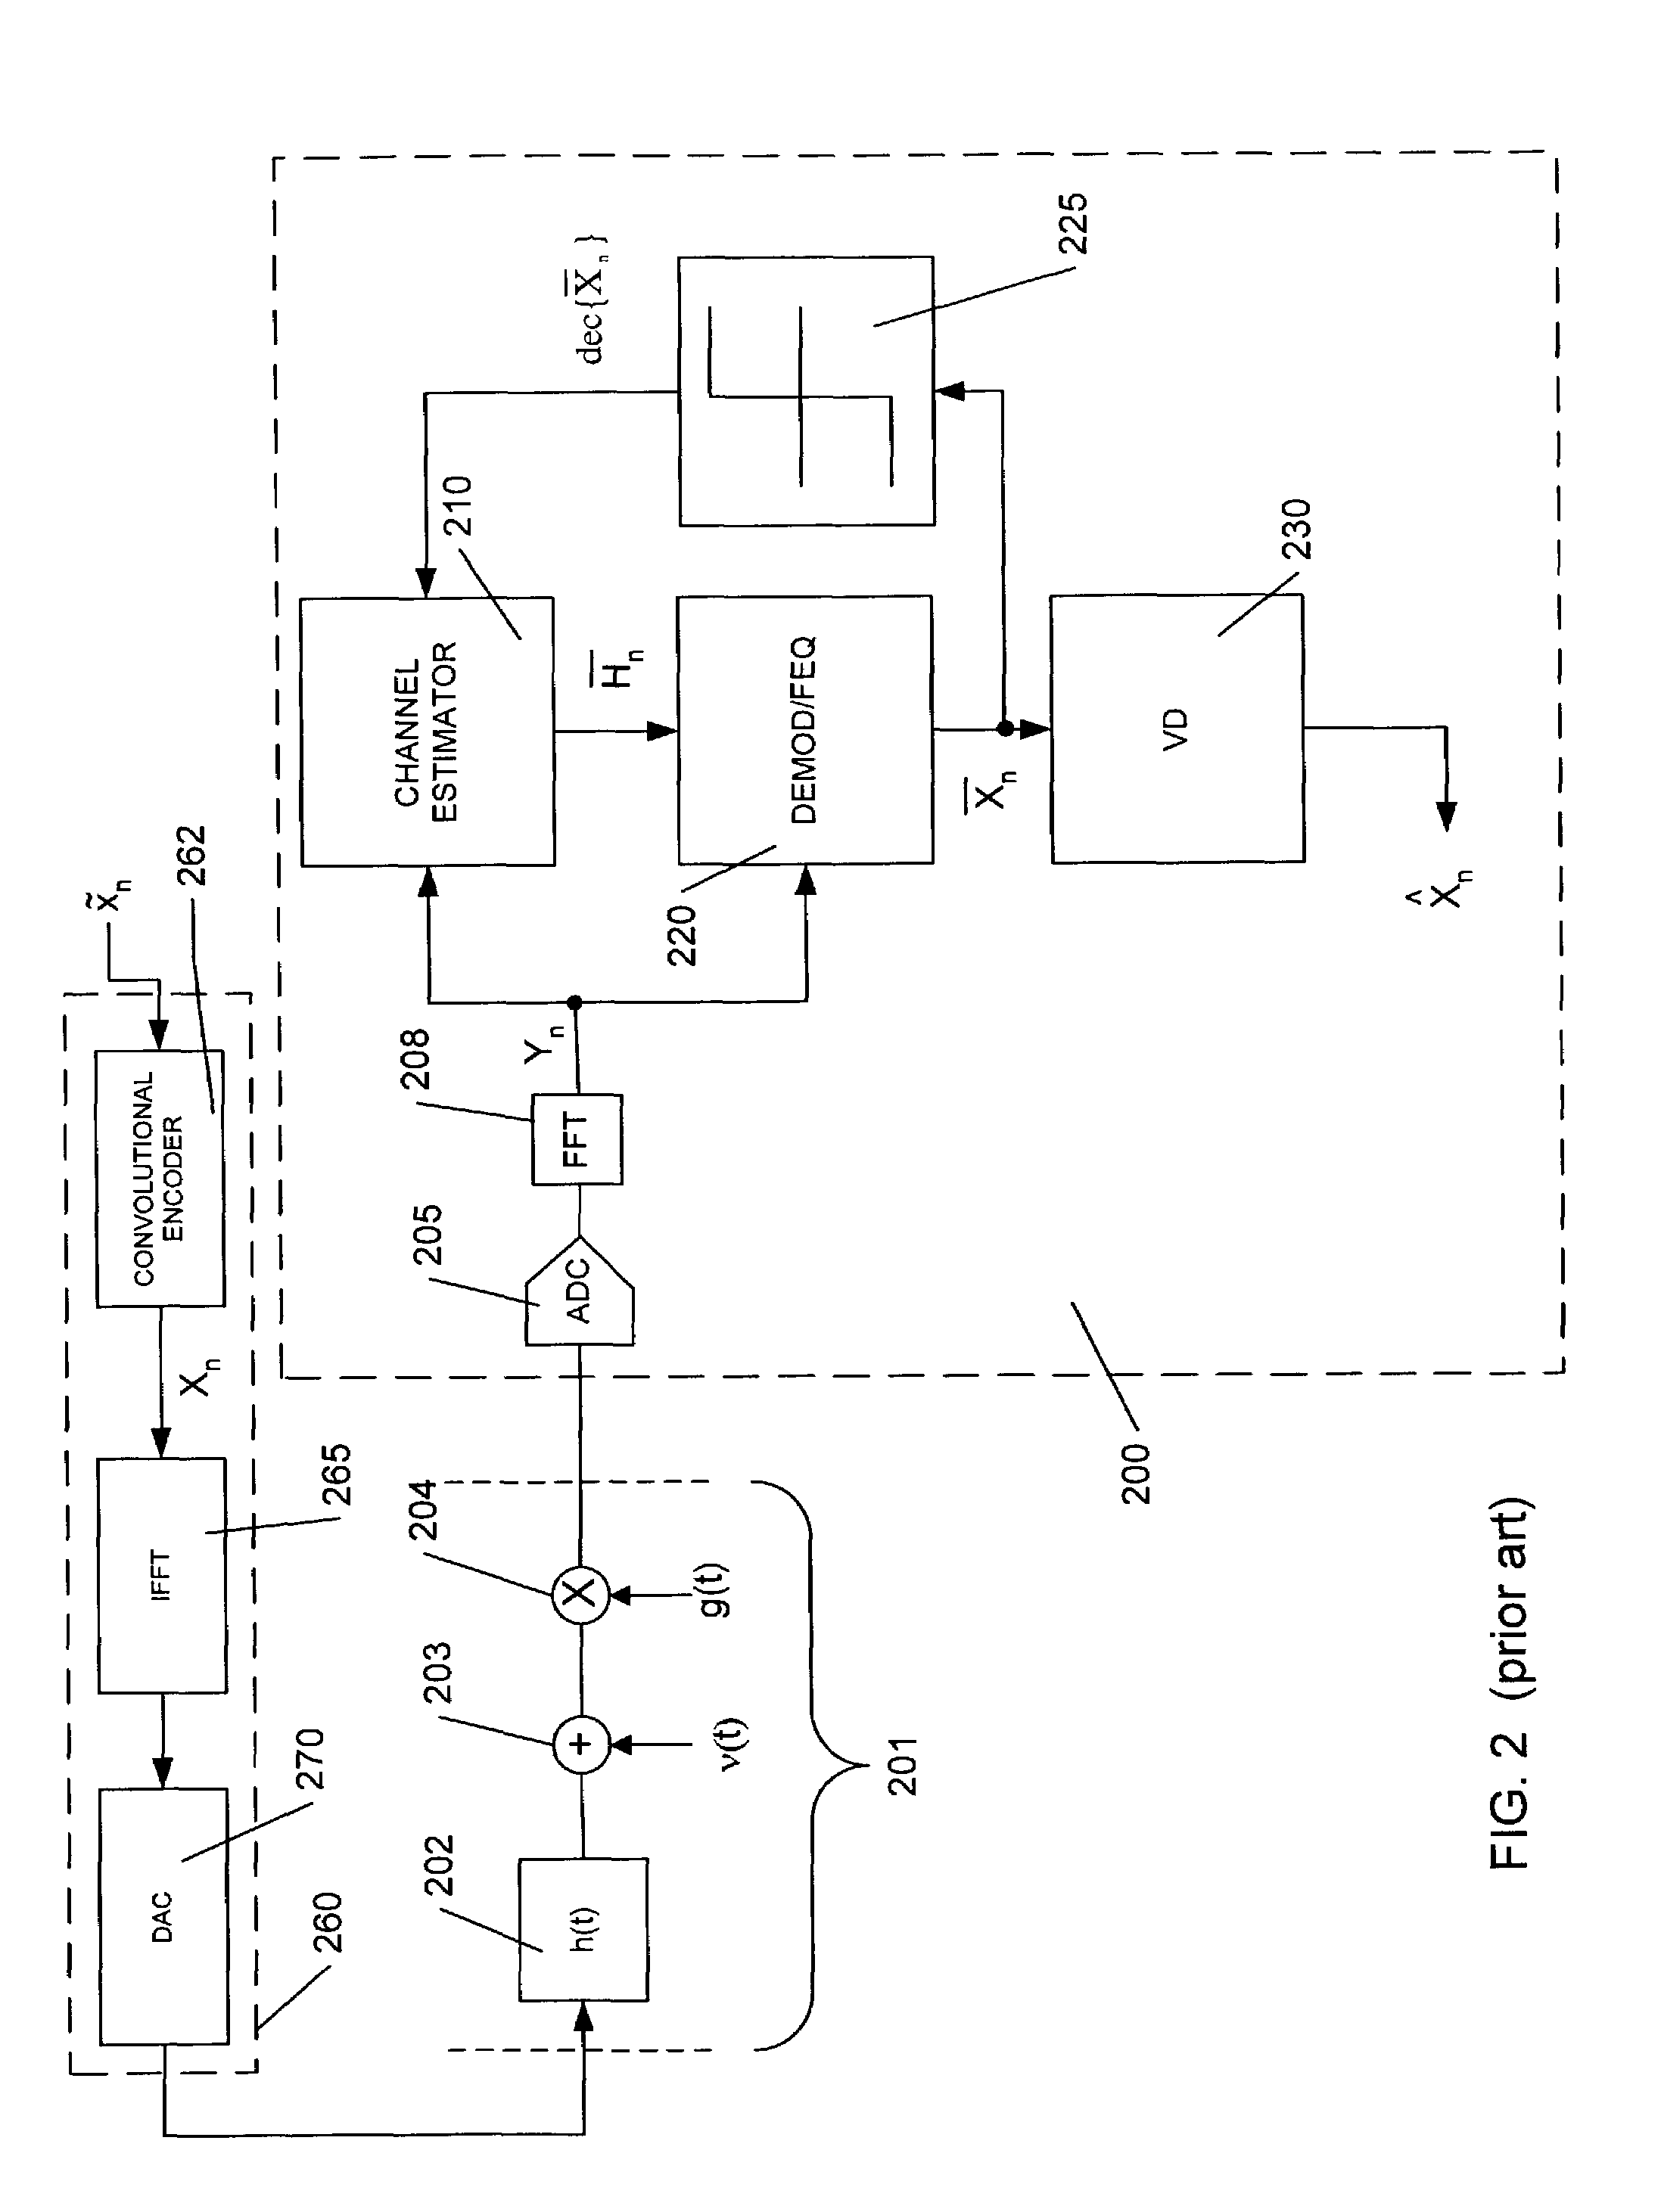 Method and apparatus for equalization and decoding in a wireless communications system including plural receiver antennae